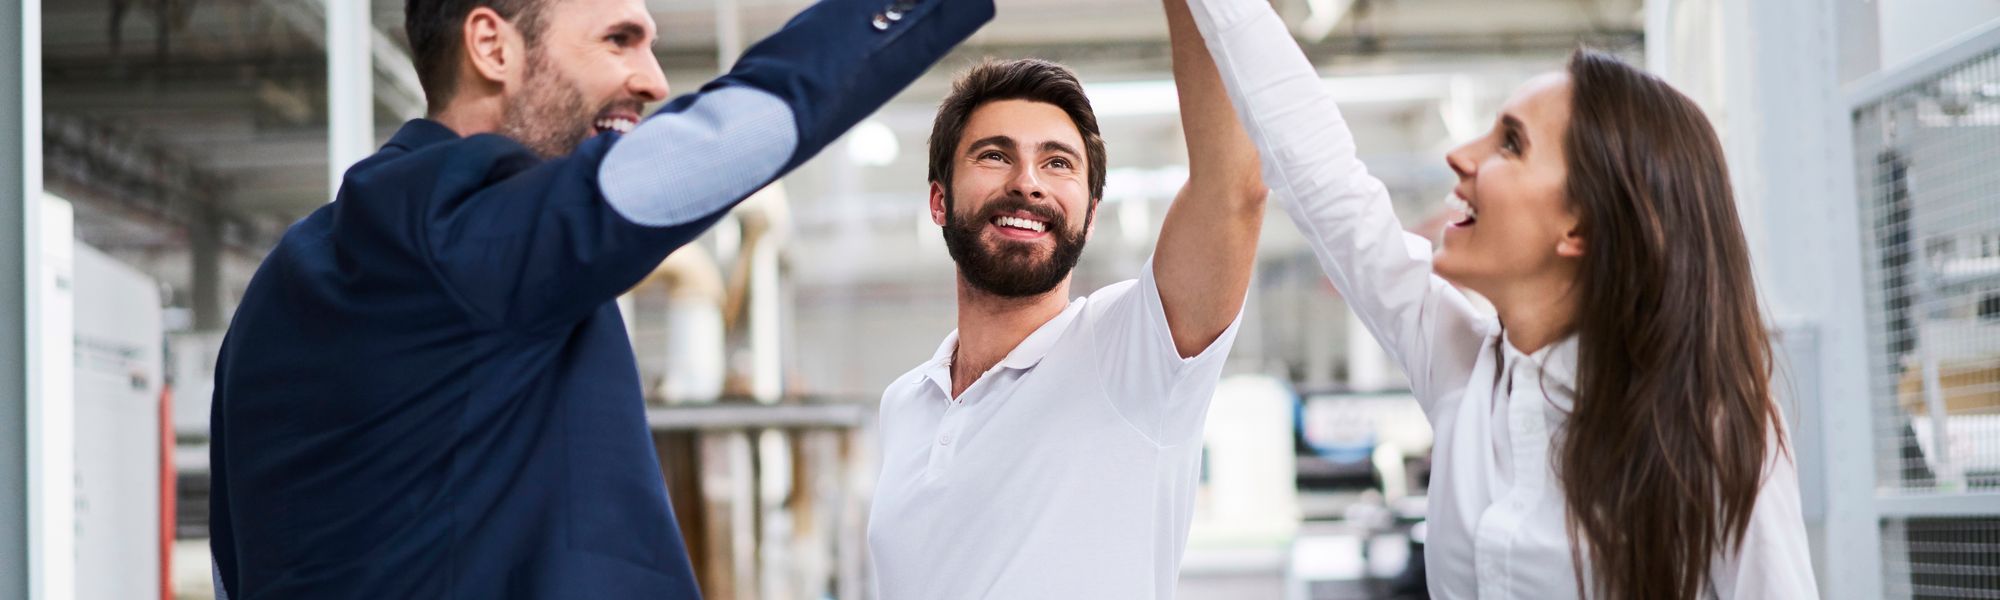 Happy Businessman And Employees High Fiving In A F 2022 12 16 22 12 26 Utc